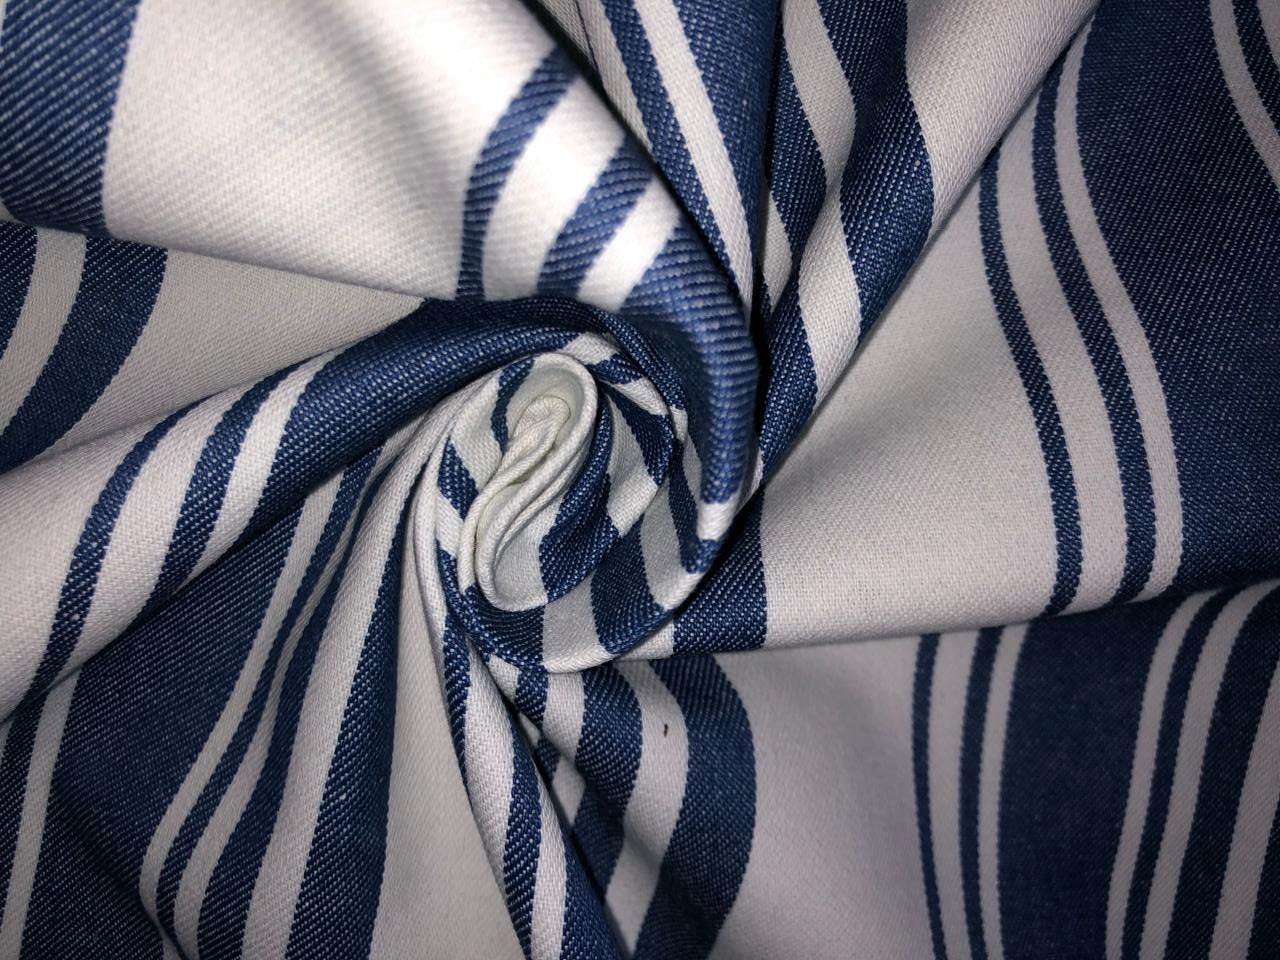 100% Cotton Denim Fabric 58" wide available in 4  different stripe designs 2 navy and white stripes and 2 navy and cream stripe